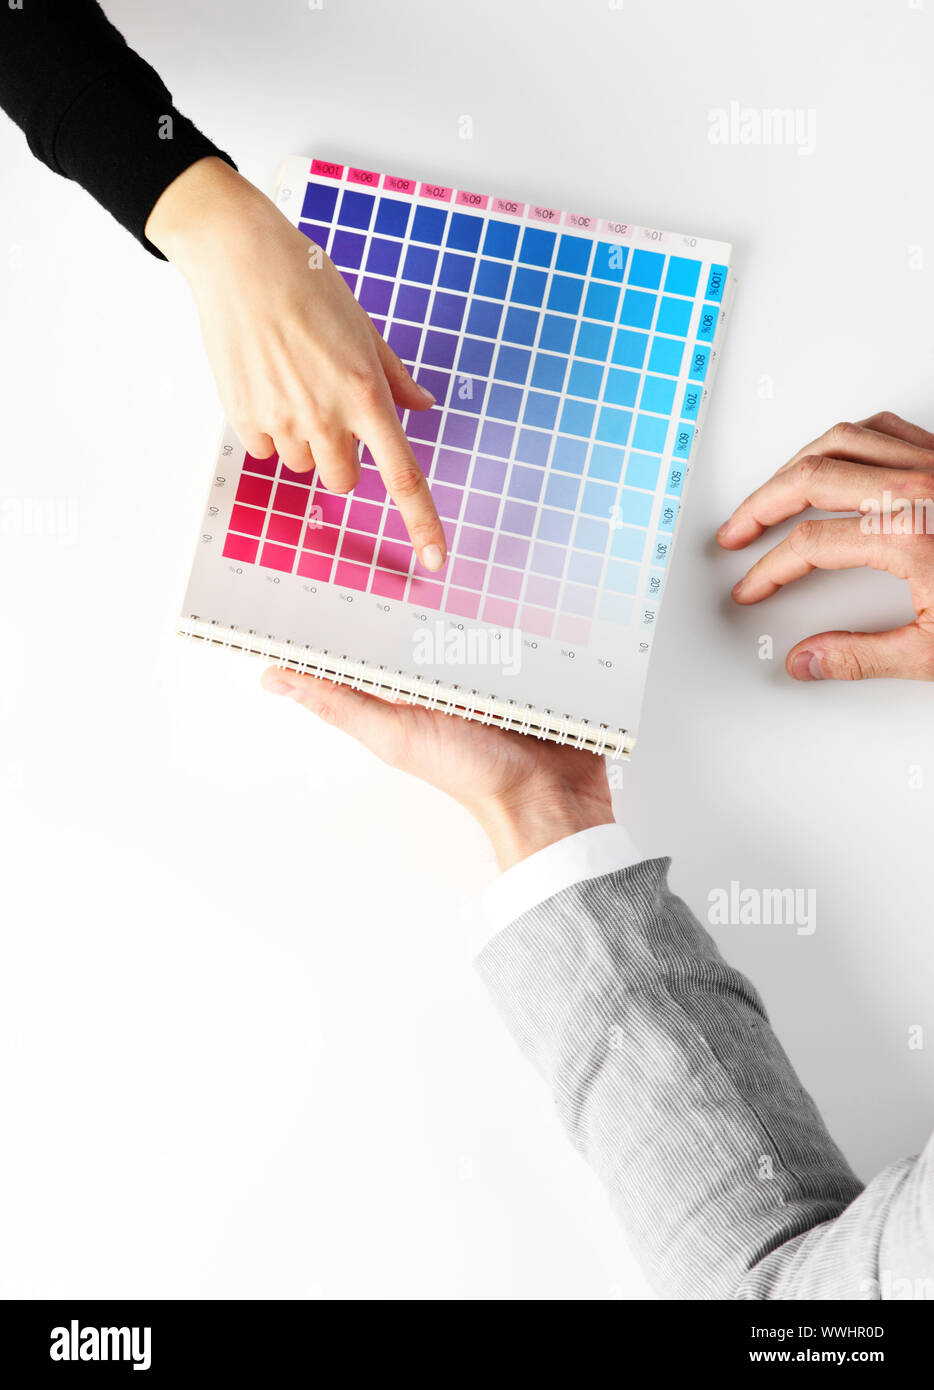 woman Choosing color from color scale, top view Stock Photo - Alamy